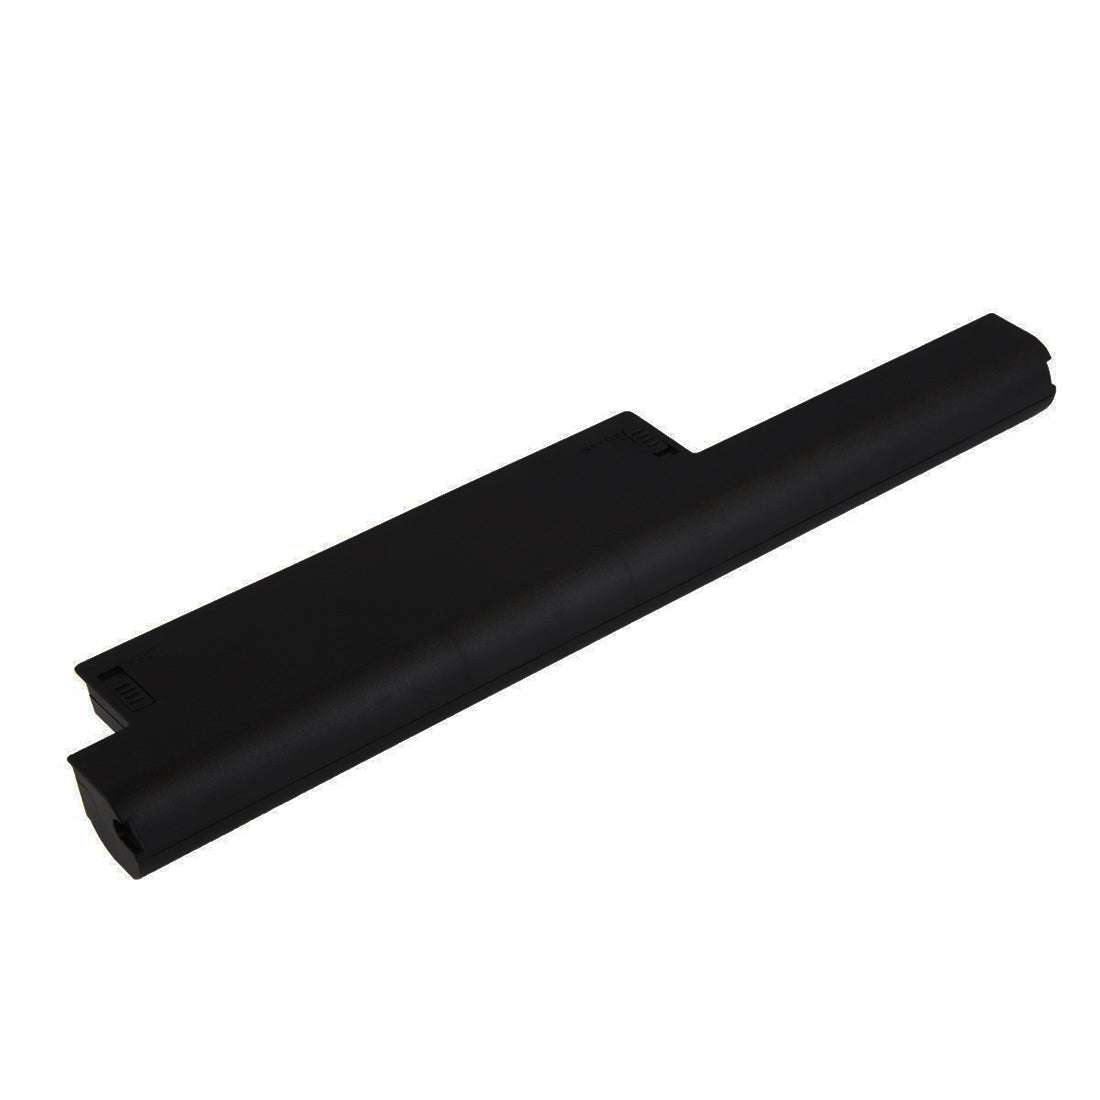 Lapcare_LSOBT6C3540_4000mAh_Laptop_Battery_From_The_Peripheral_Store